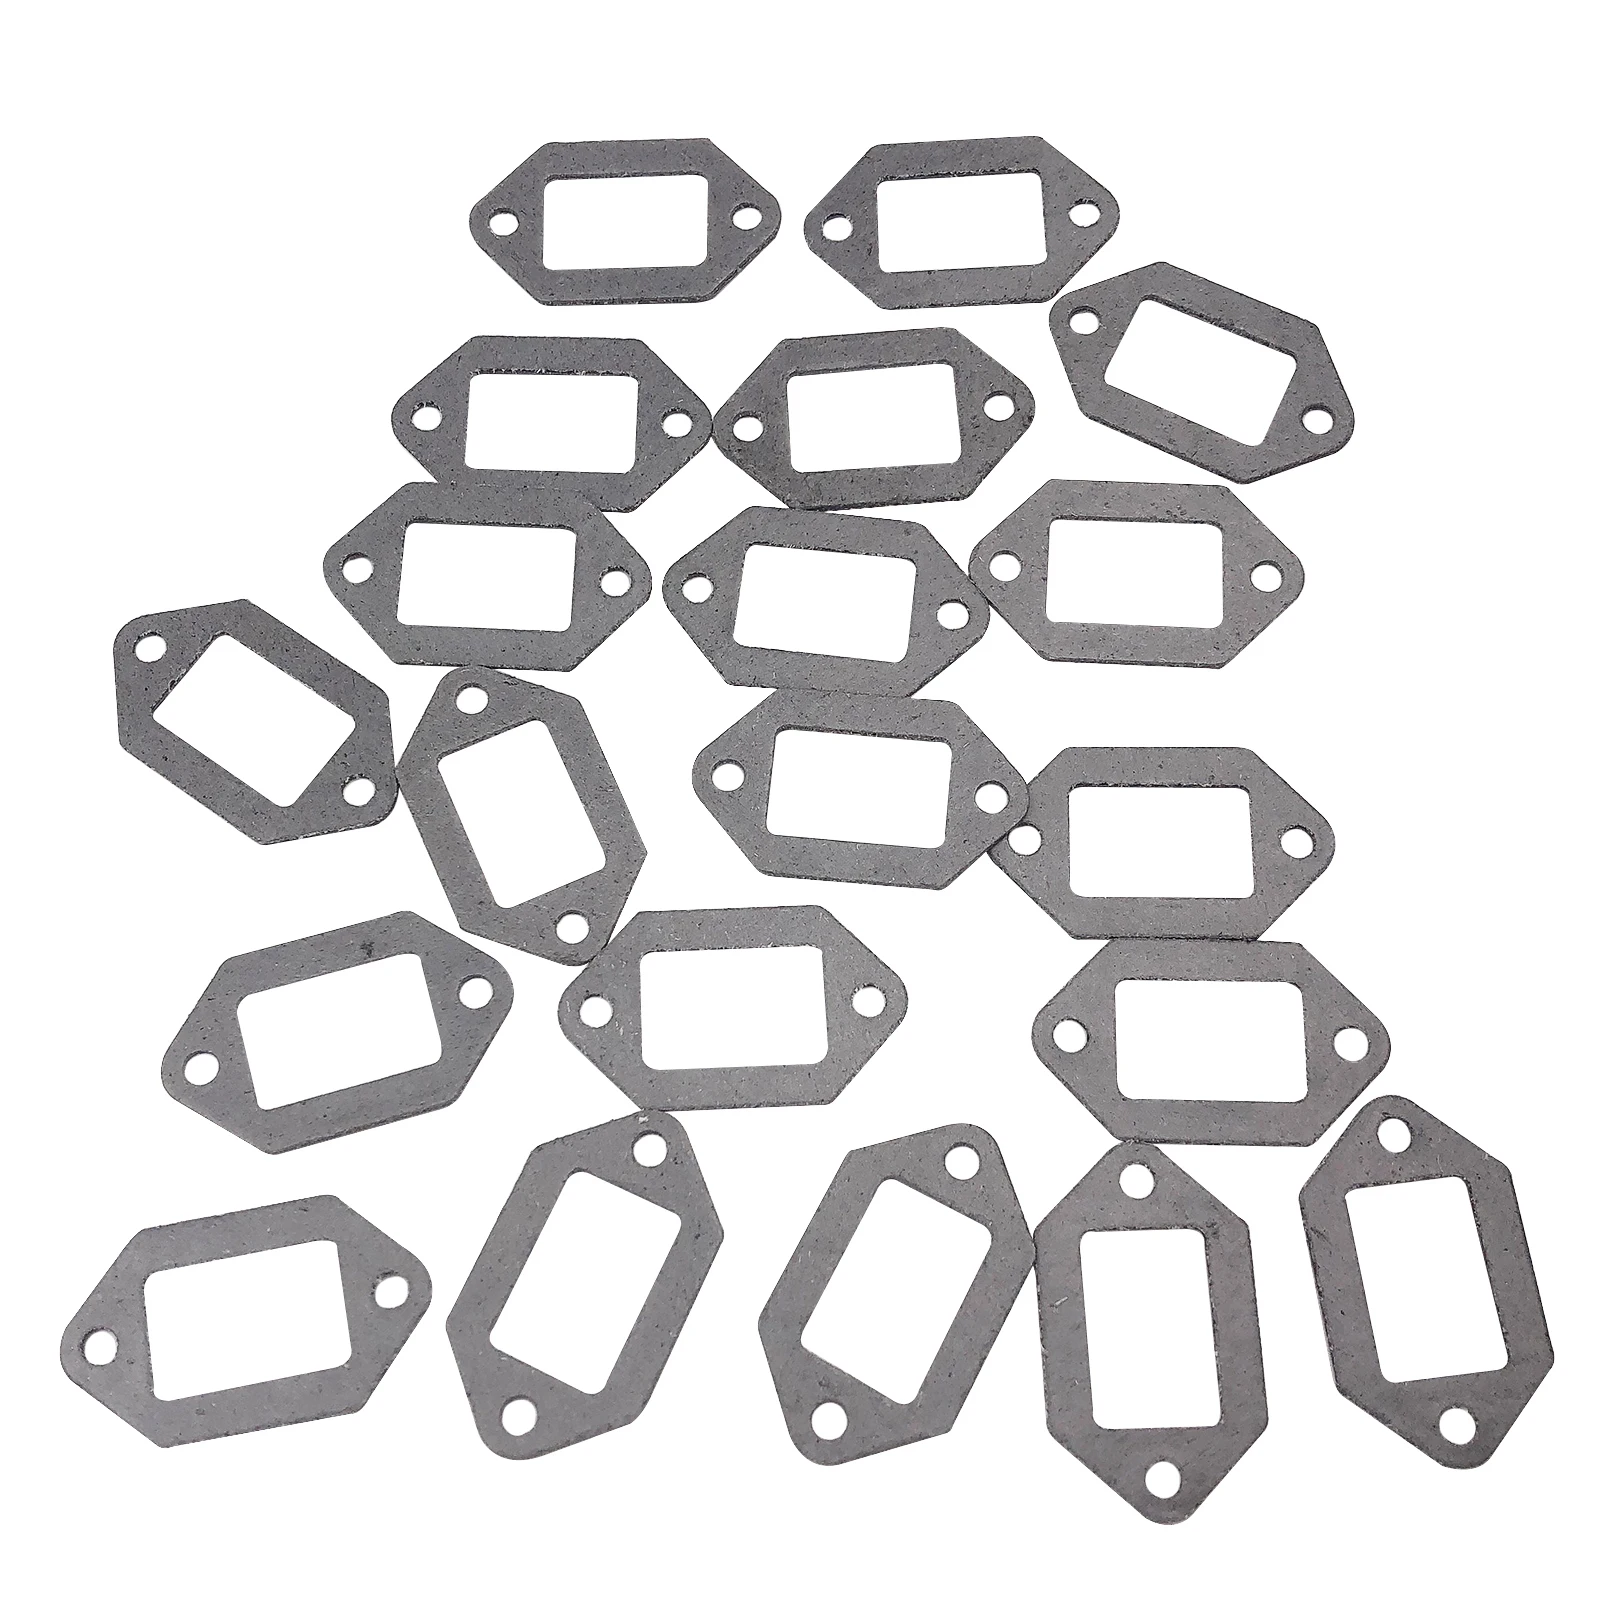 20Pieces Muffler Gasket Replacements Accessory for stihl MS380 MS381 MS440 MS441 MS460 MS650